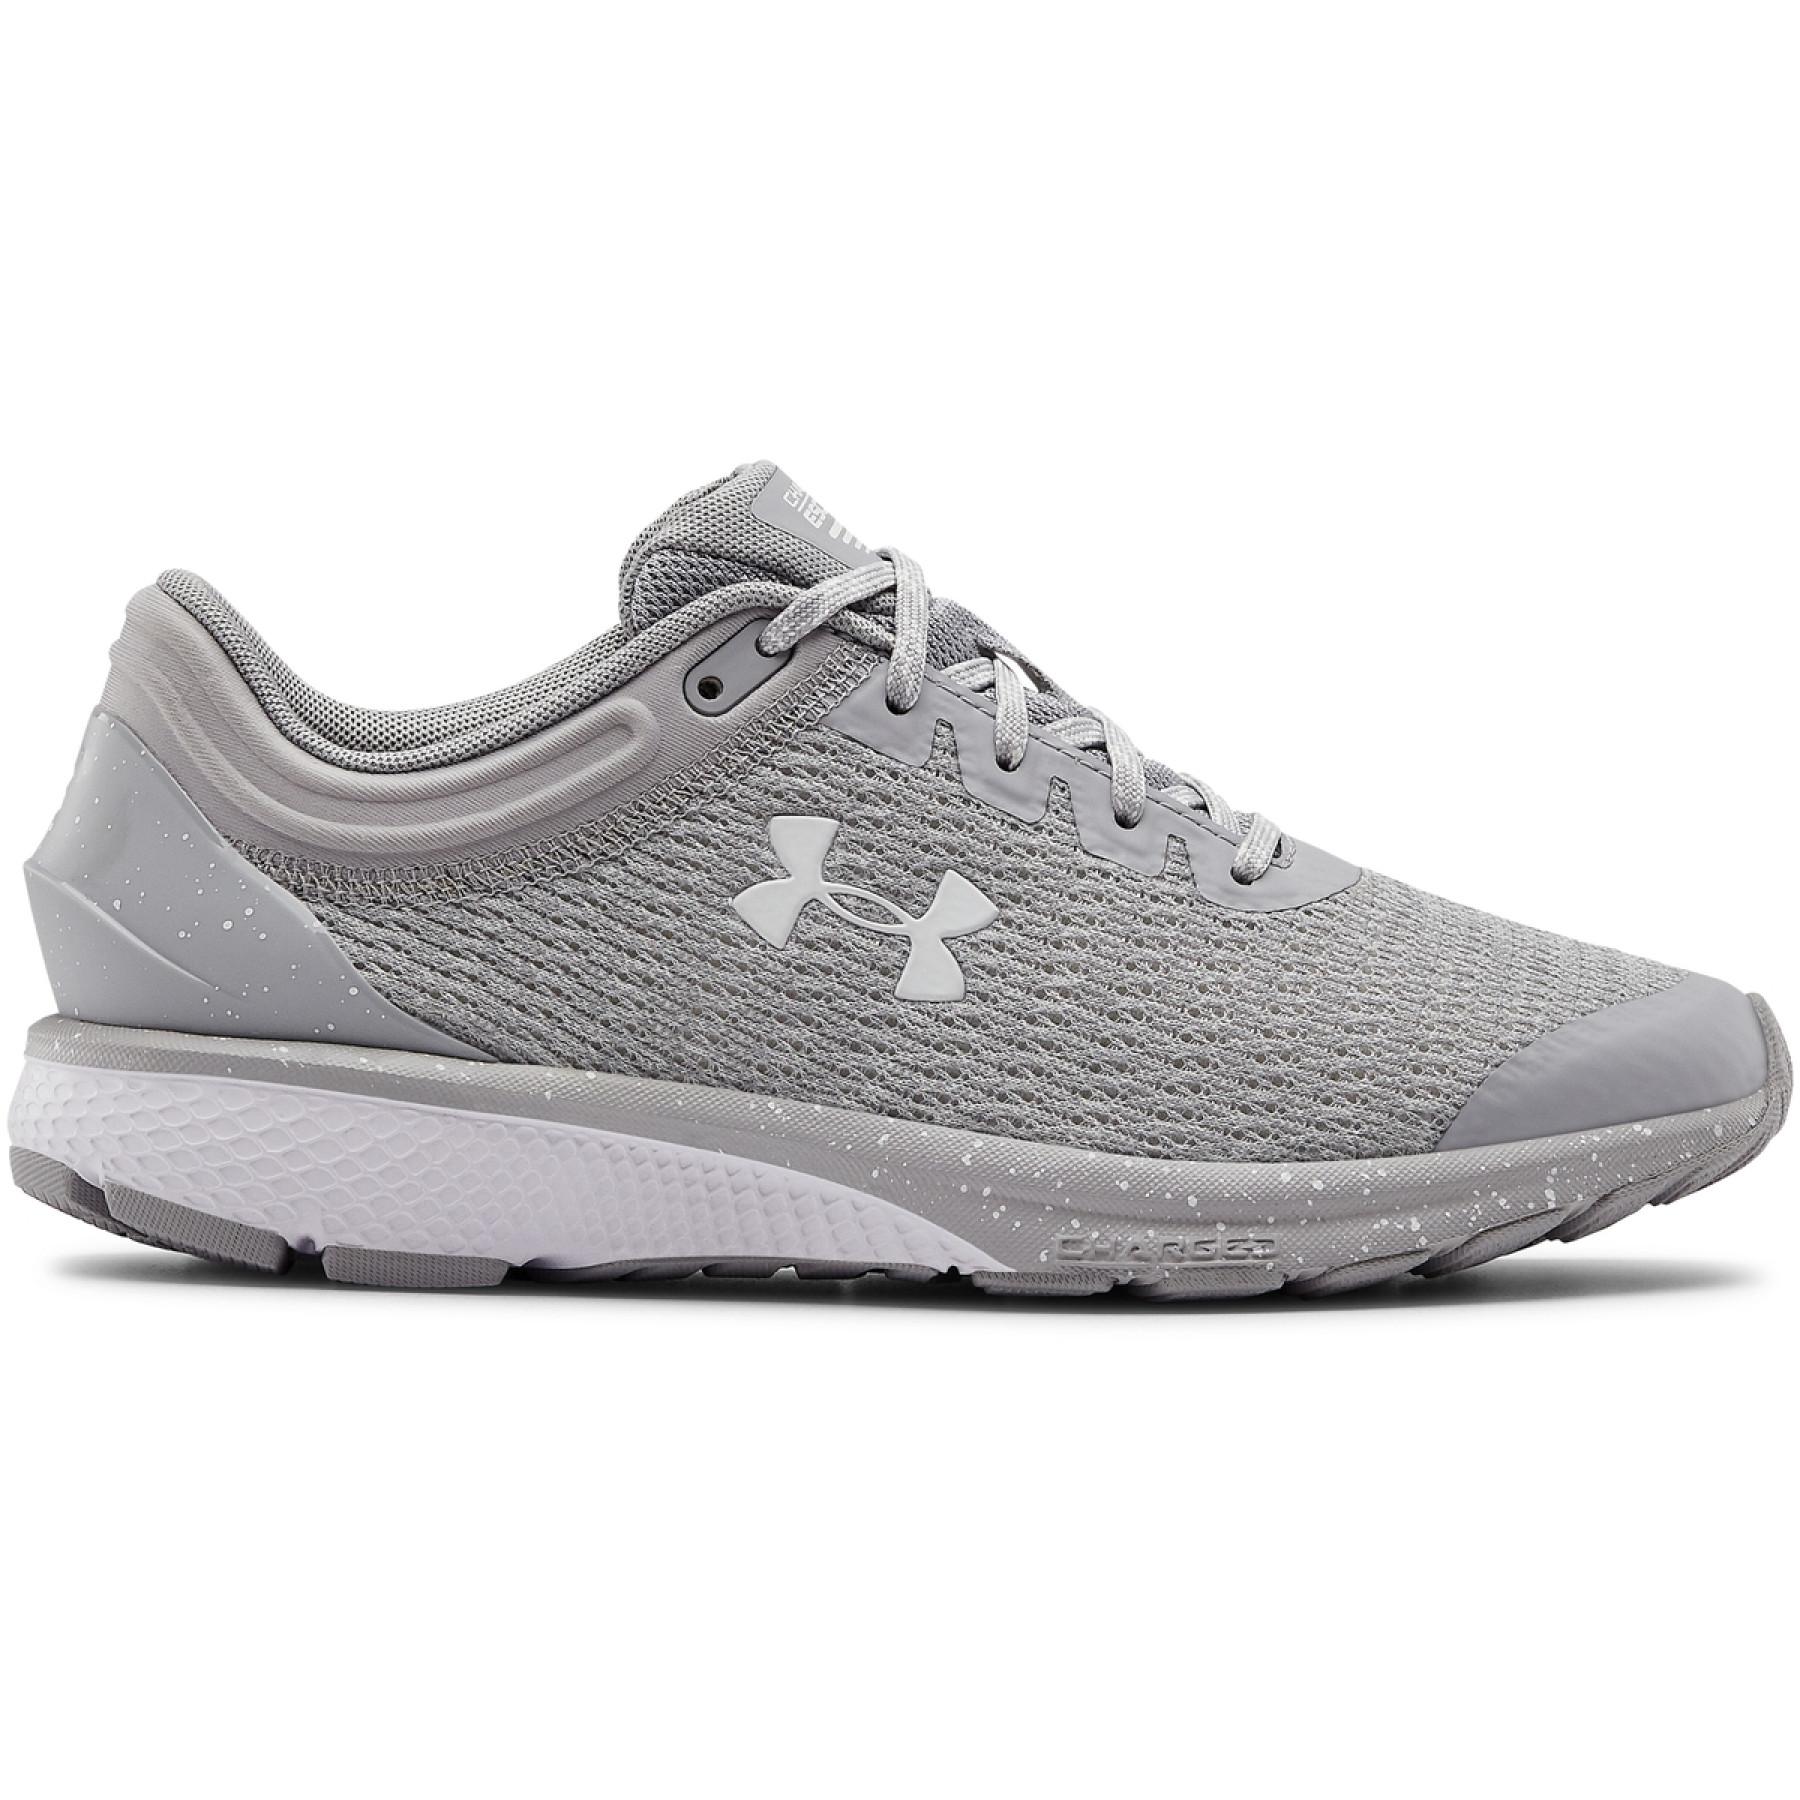 Chaussures de running femme Under Armour Charged Escape 3 Reflect